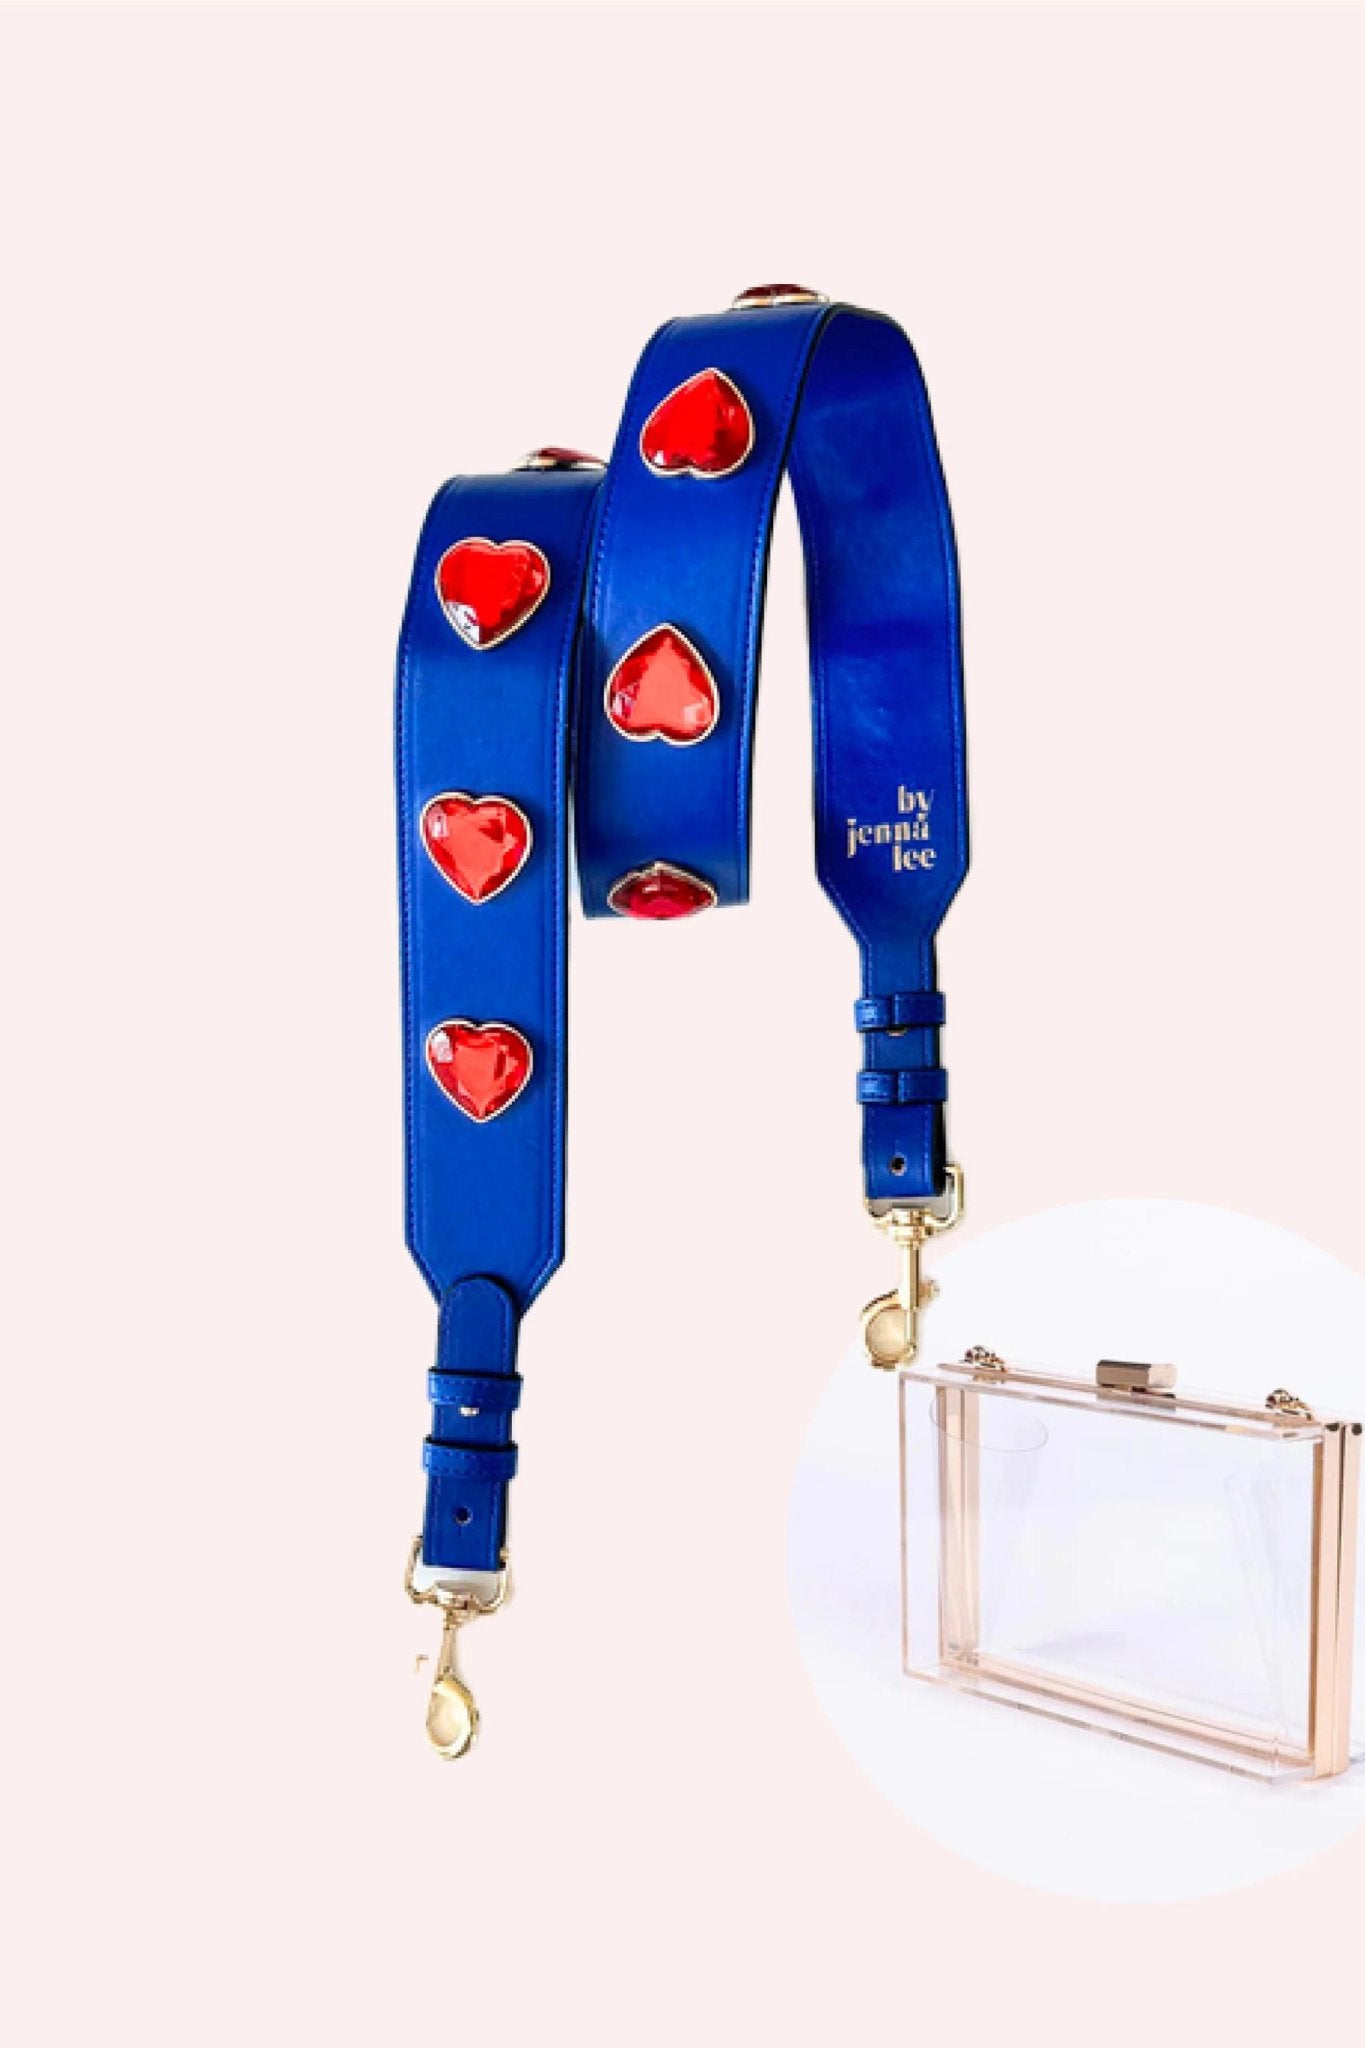 Crystal Heart Bag Strap Blue With Red + Clear Bag - By Jenna Lee - Color Game